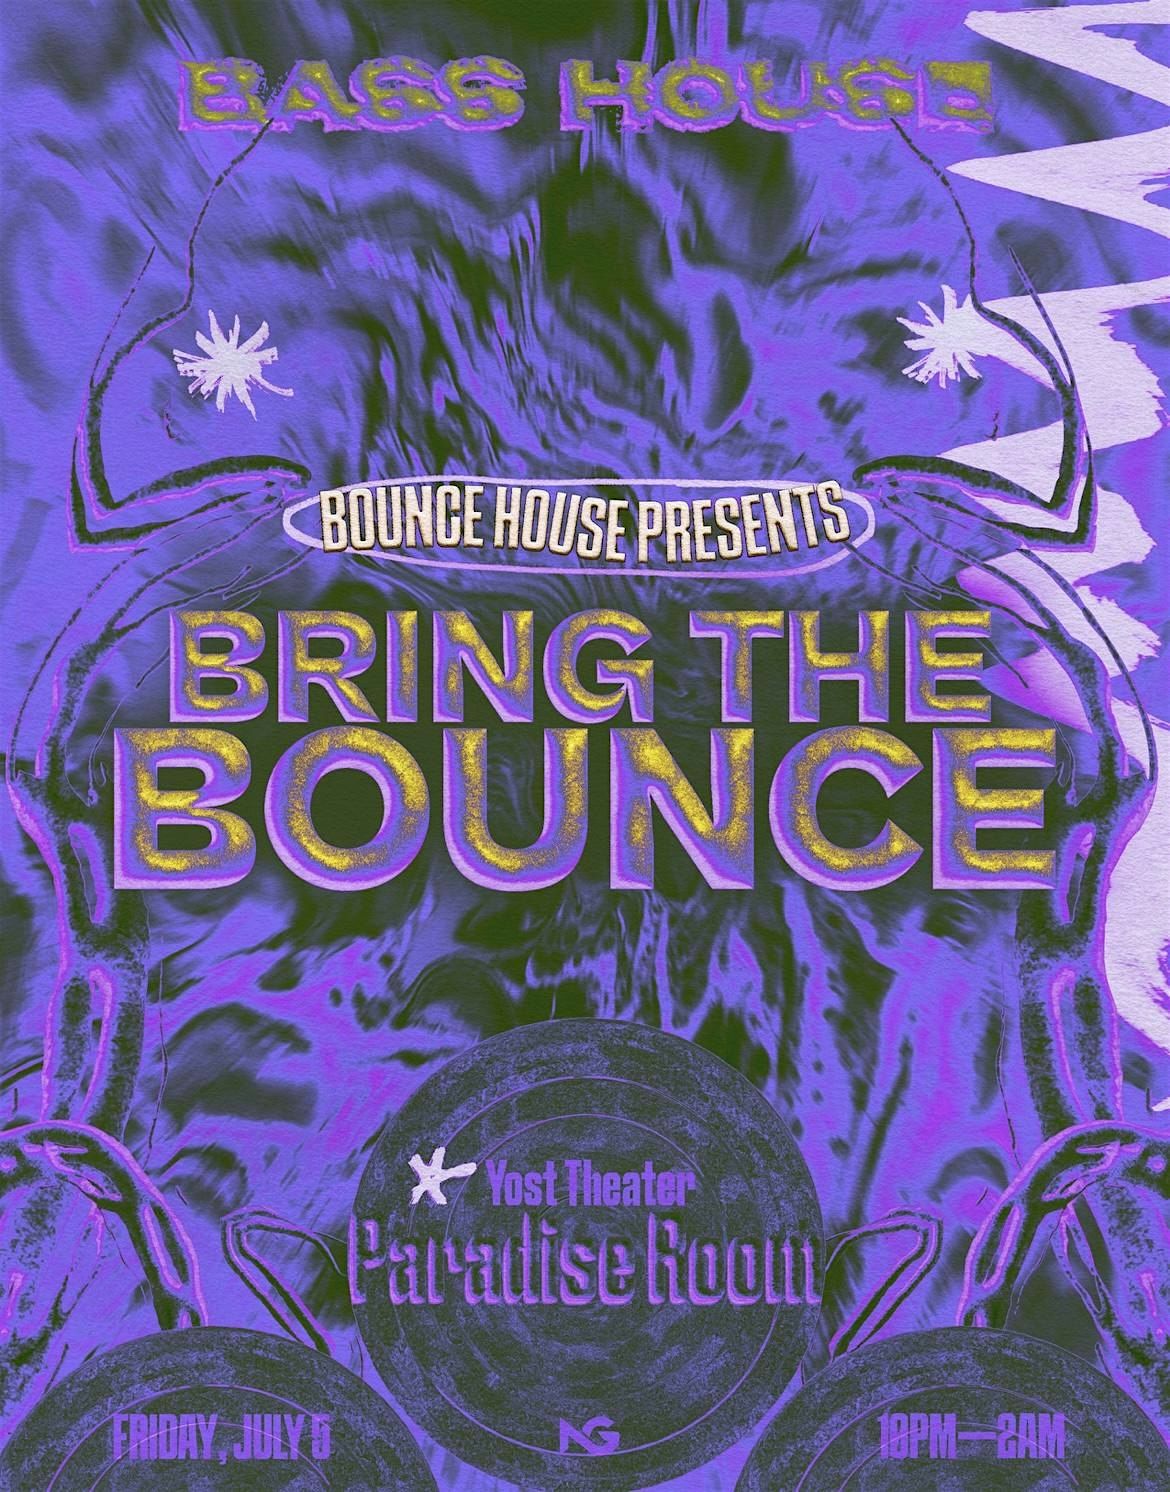 Bring the Bounce vol. 1 | Bass House Show OC